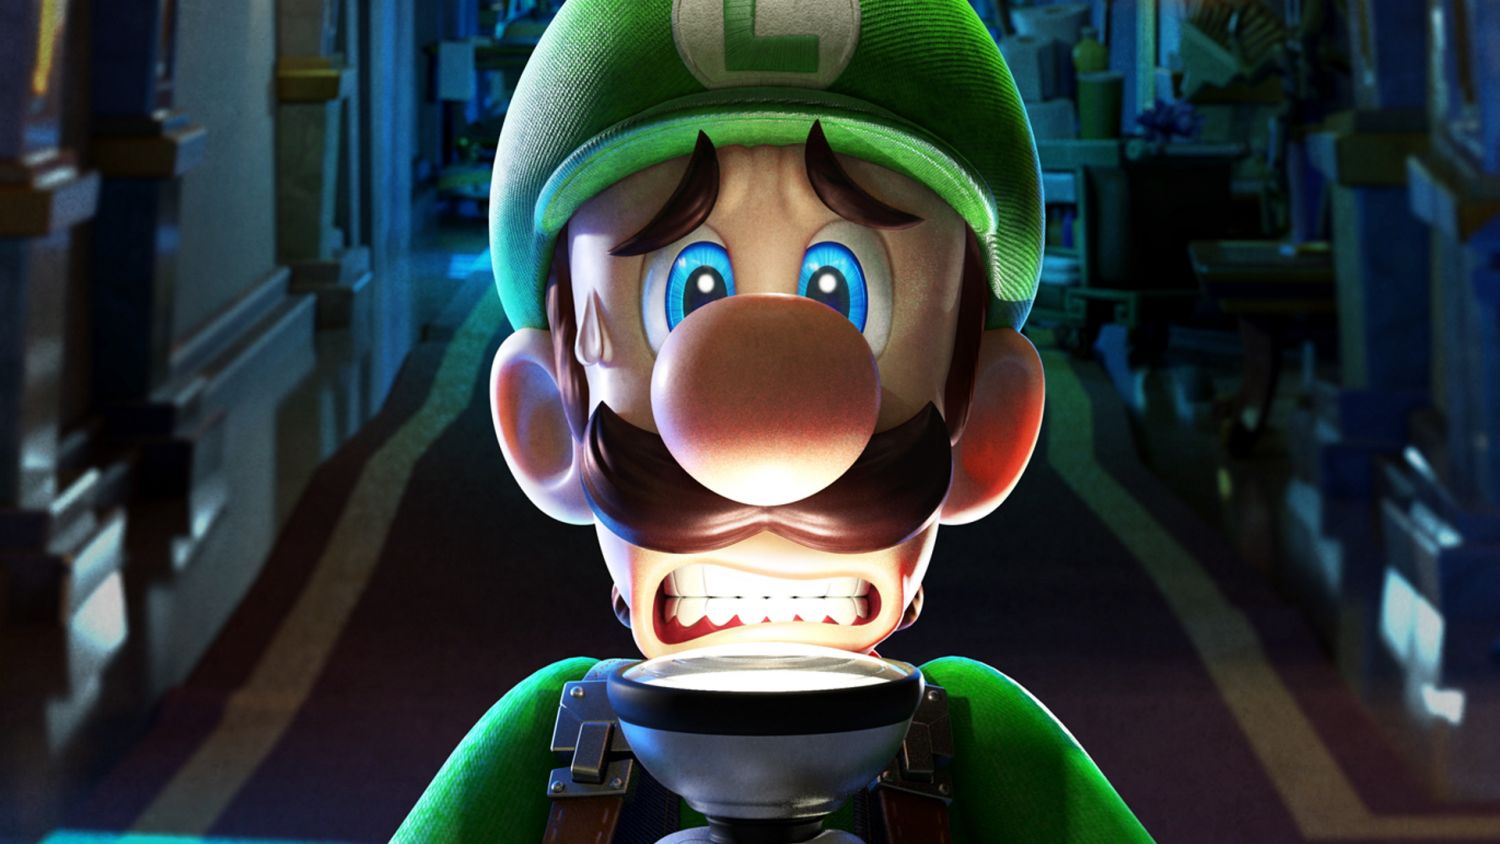 Charlie Day would be down for a Luigi's Mansion movie